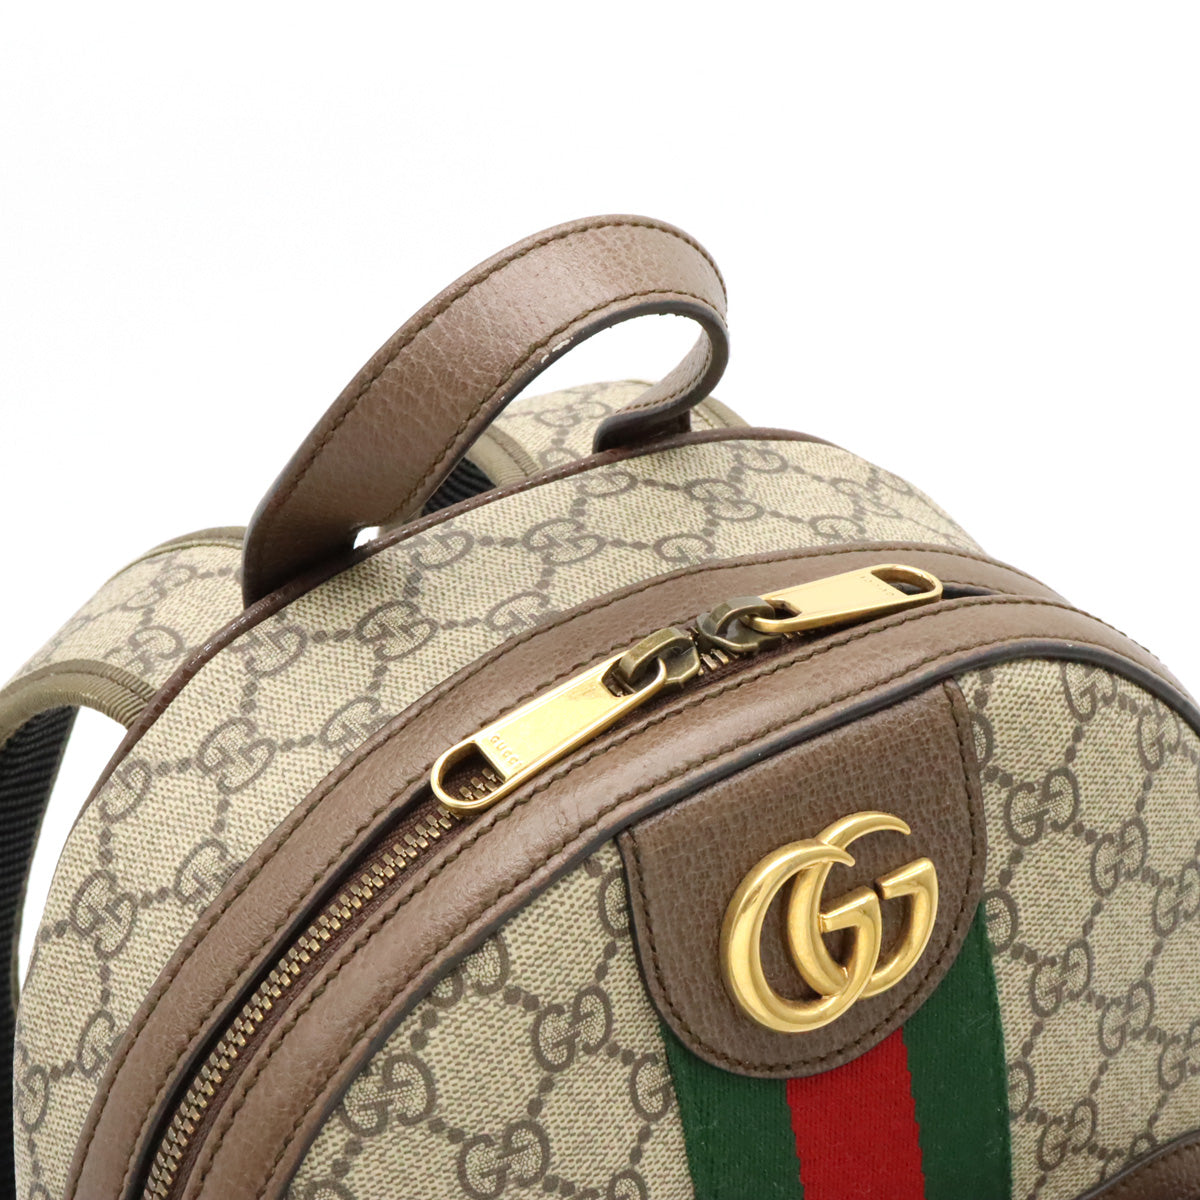 GUCCI Gucci Ophidia GG Spring Small Backpack Backpack Backpack PVC S Line Beige Moca Brown 547965